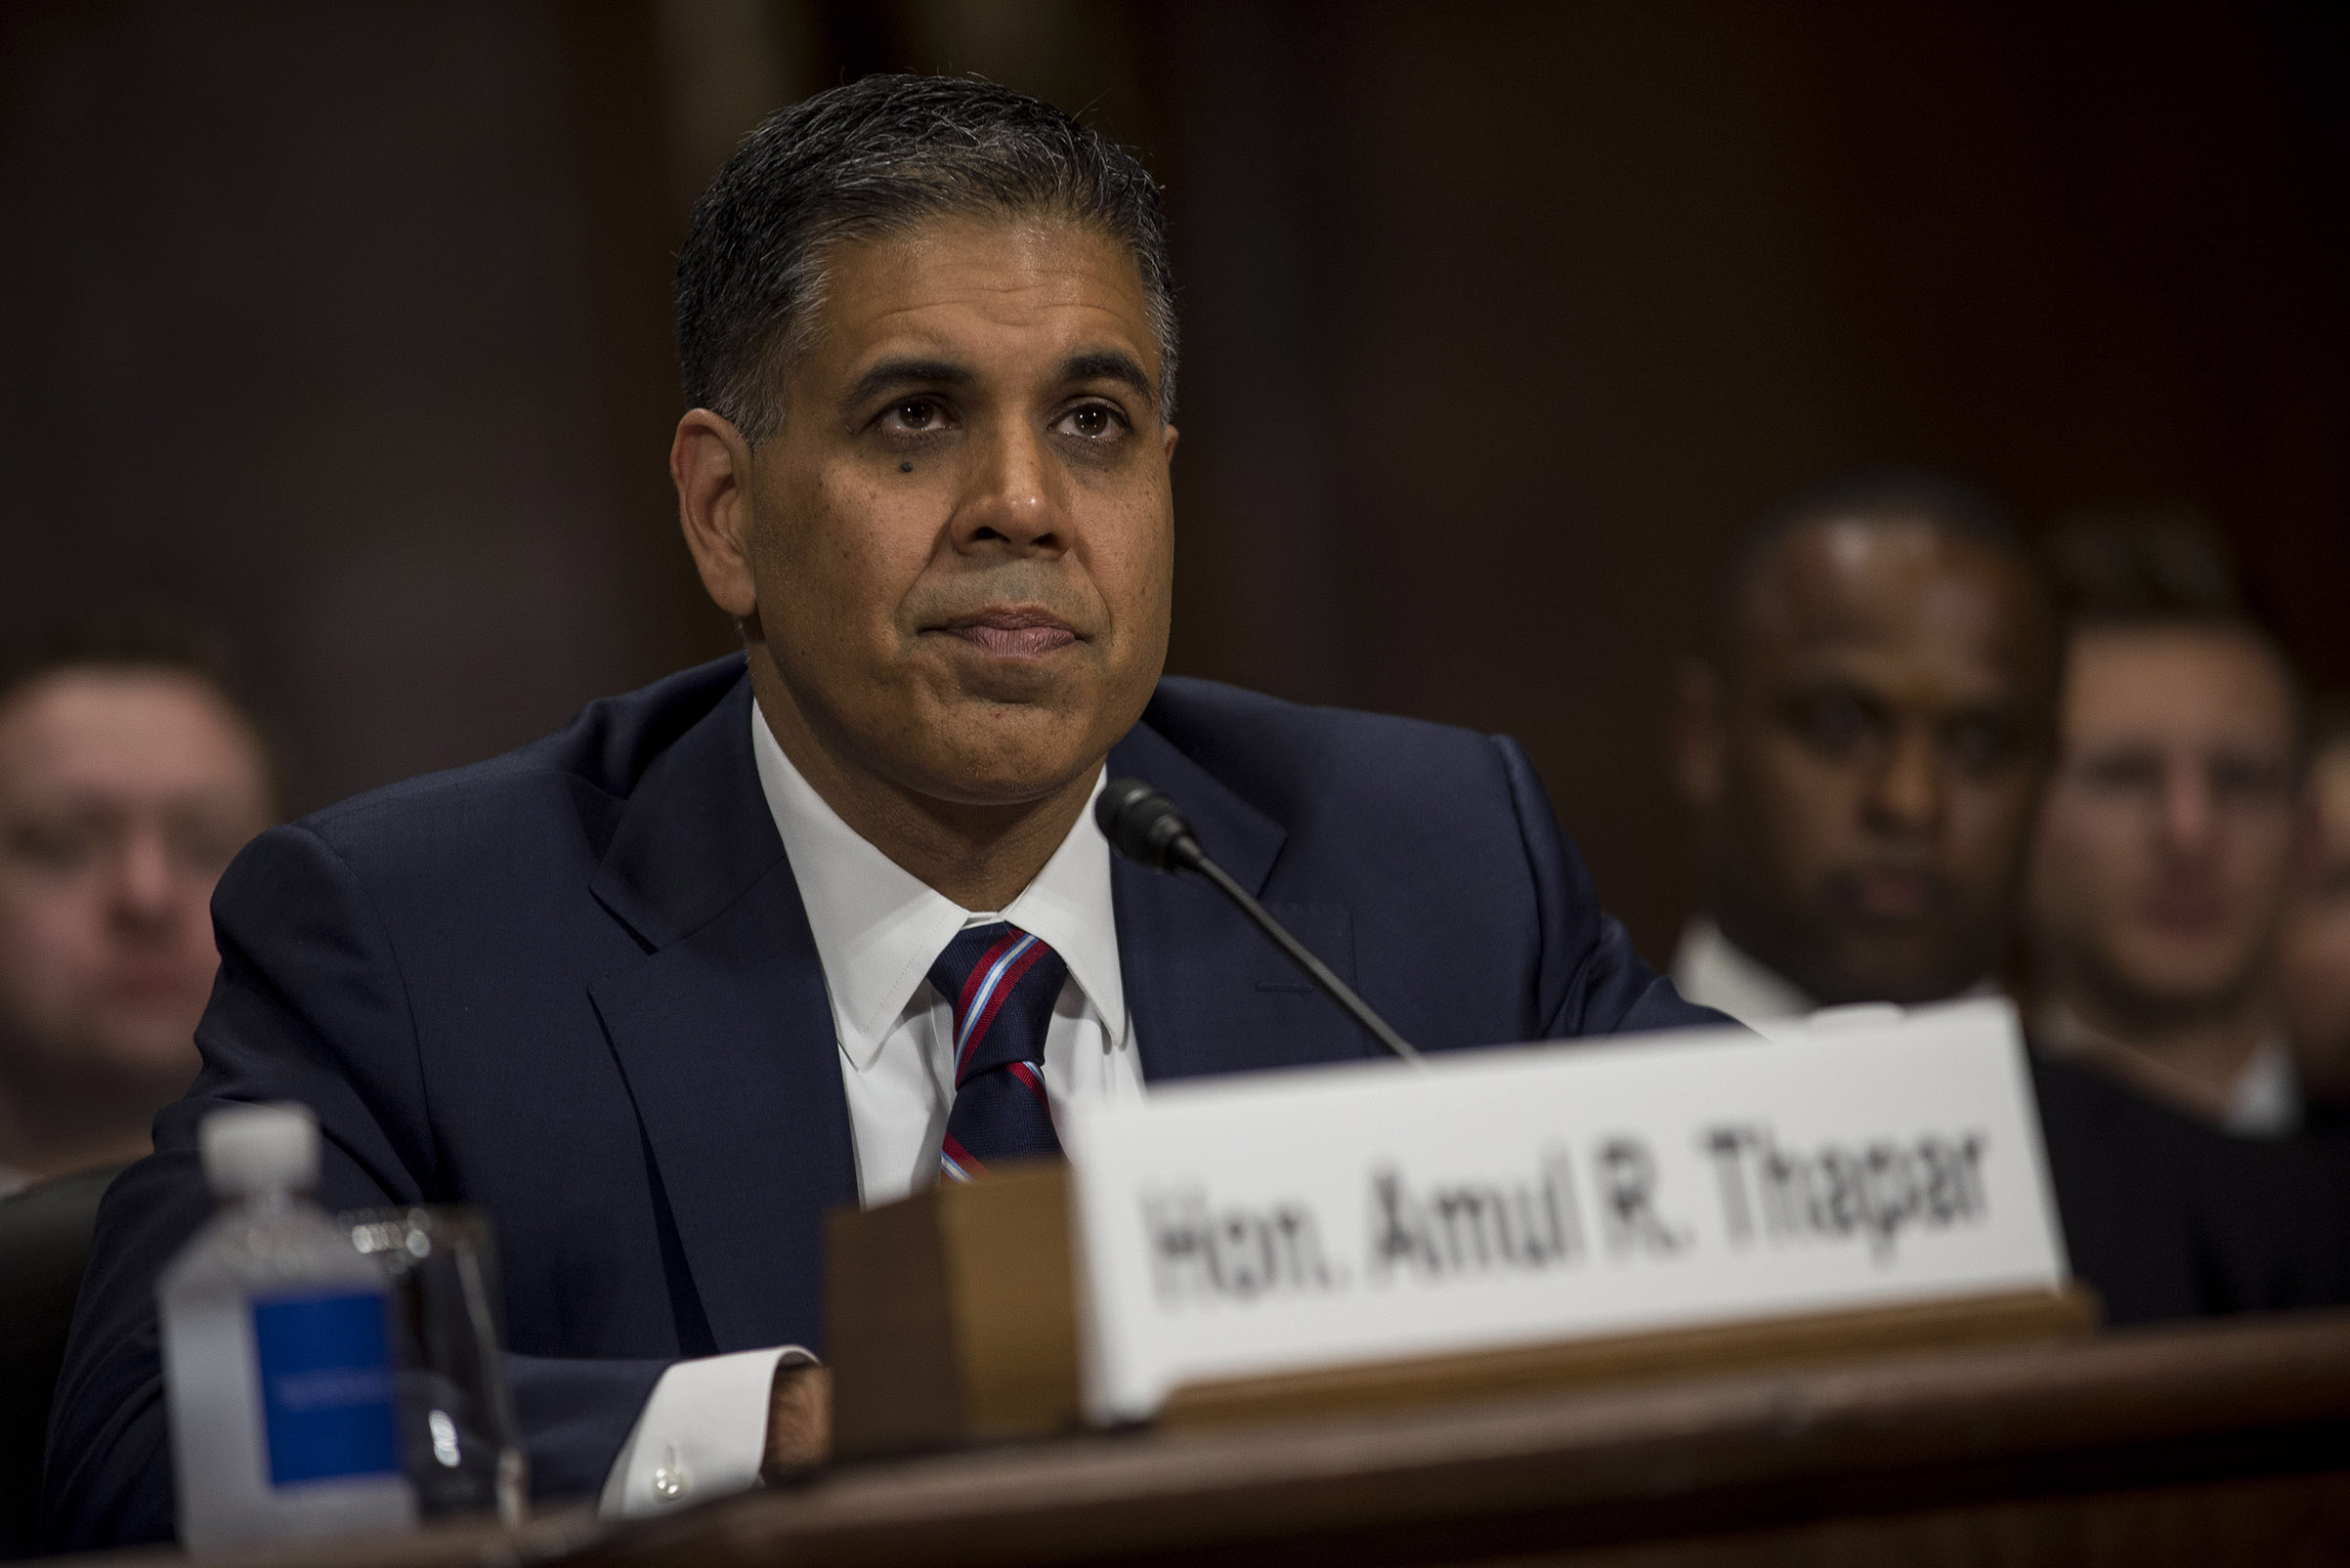 Amul Thapar, a federal judge in Kentucky nominated for a seat on the U.S. Court of Appeals for the Sixth Circuit, during a Senate Judiciary confirmation hearing on Capitol Hill in Washington, April 26, 2017 (Gabriella Demczuk—The New York Times/Redux)